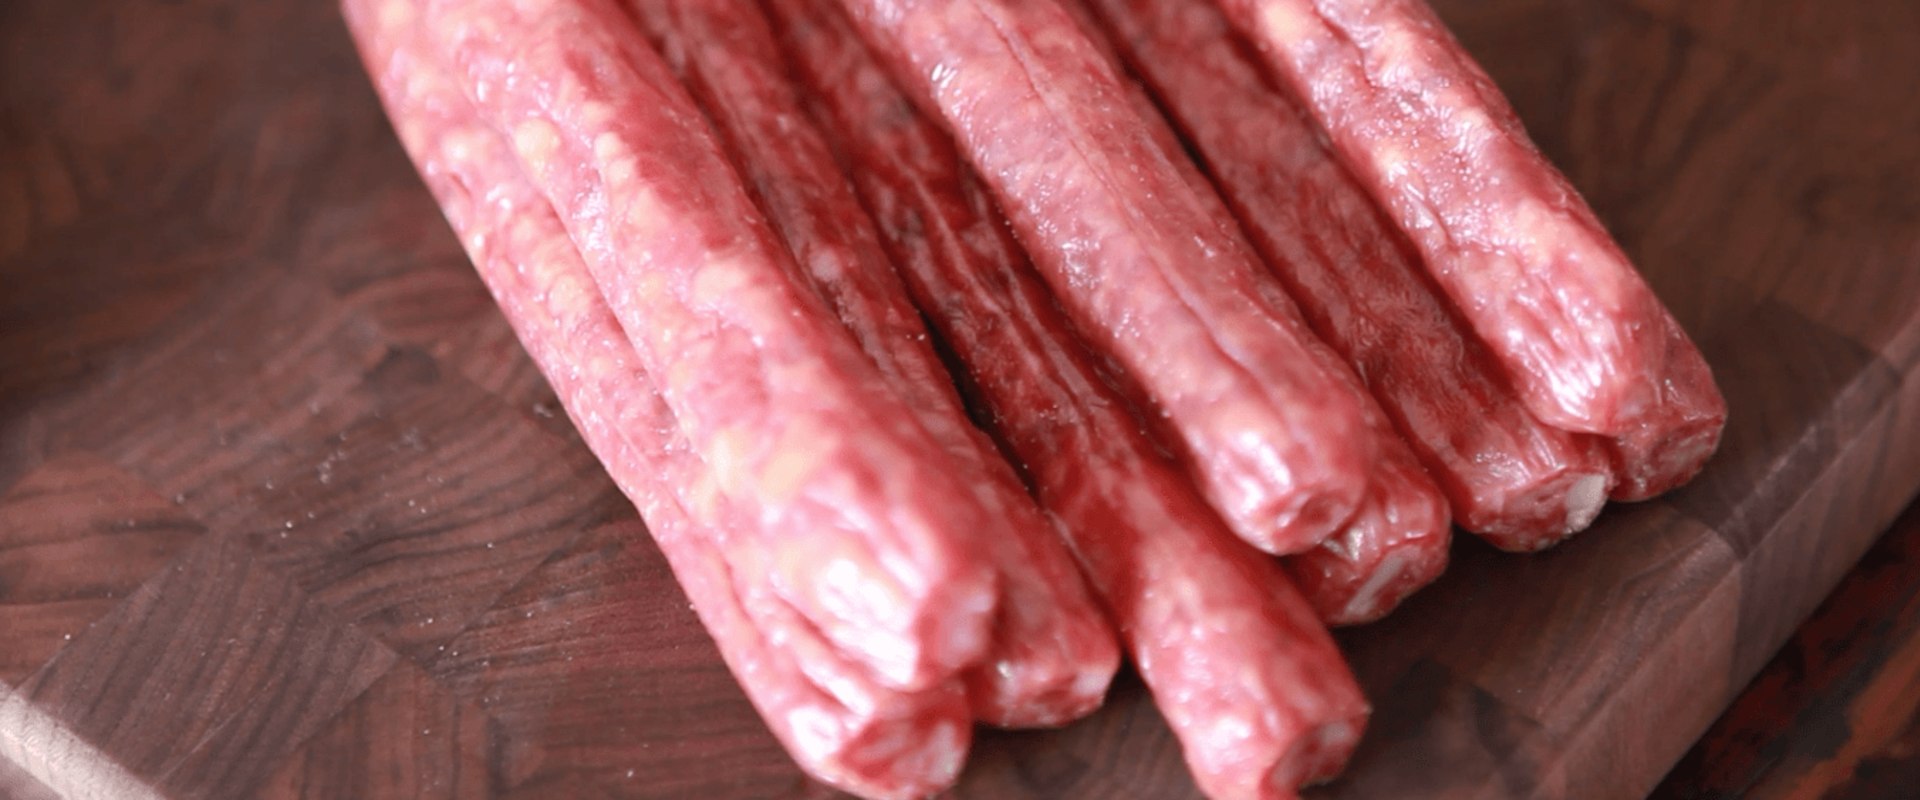 What is the difference between chinese sausage and regular sausage?